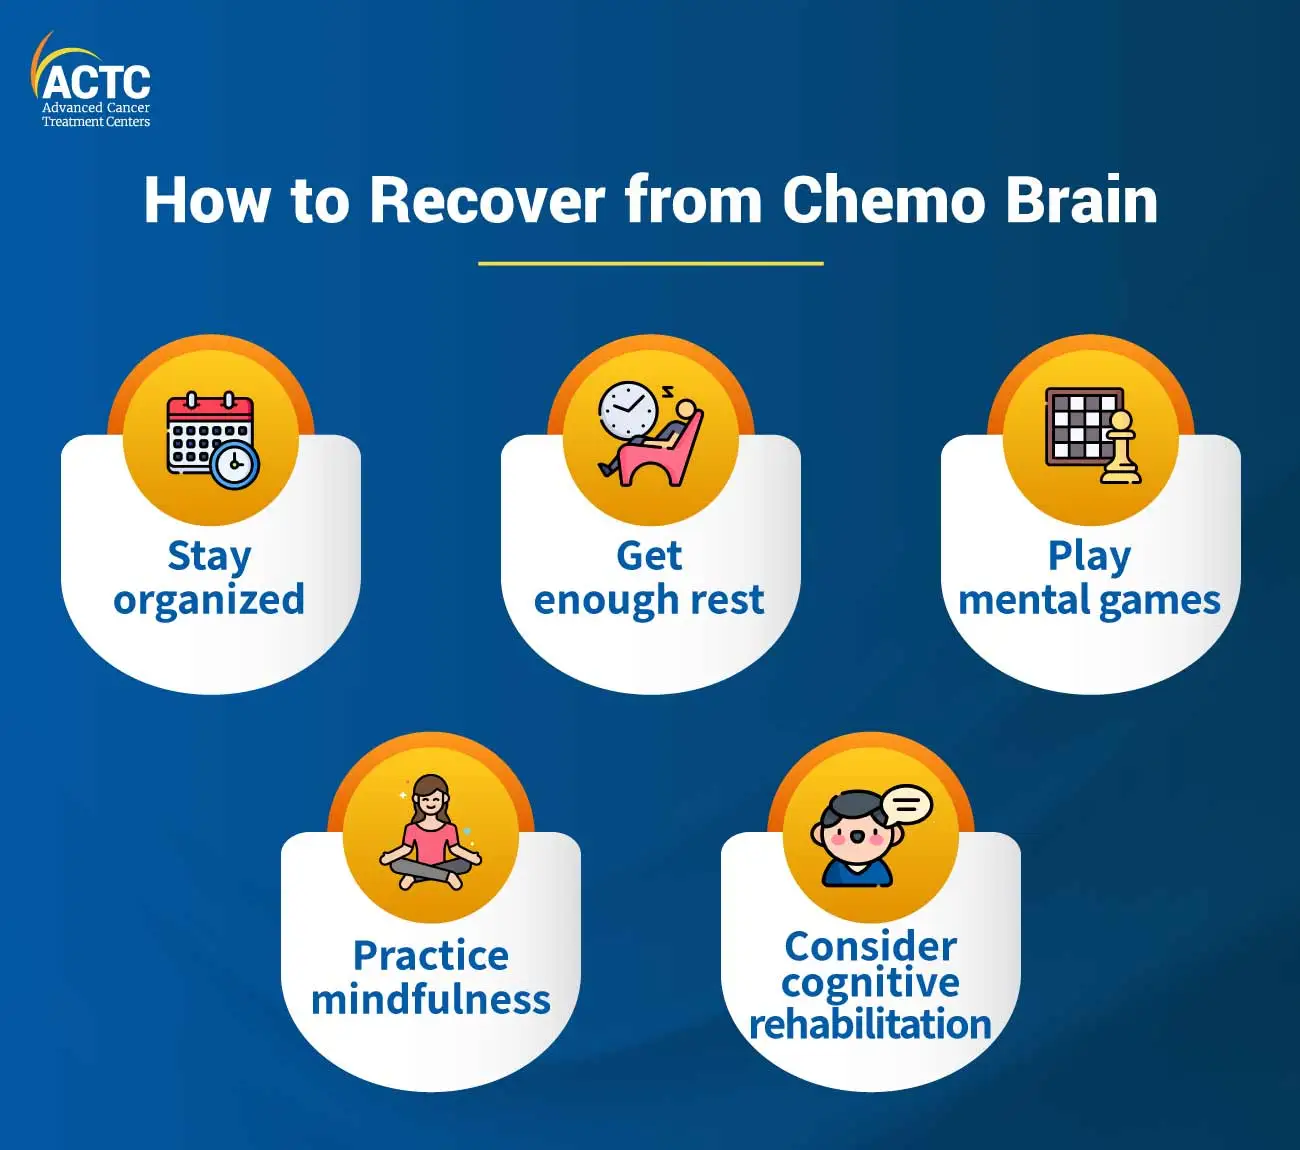 Effective To-dos to Recover from Chemo Brain